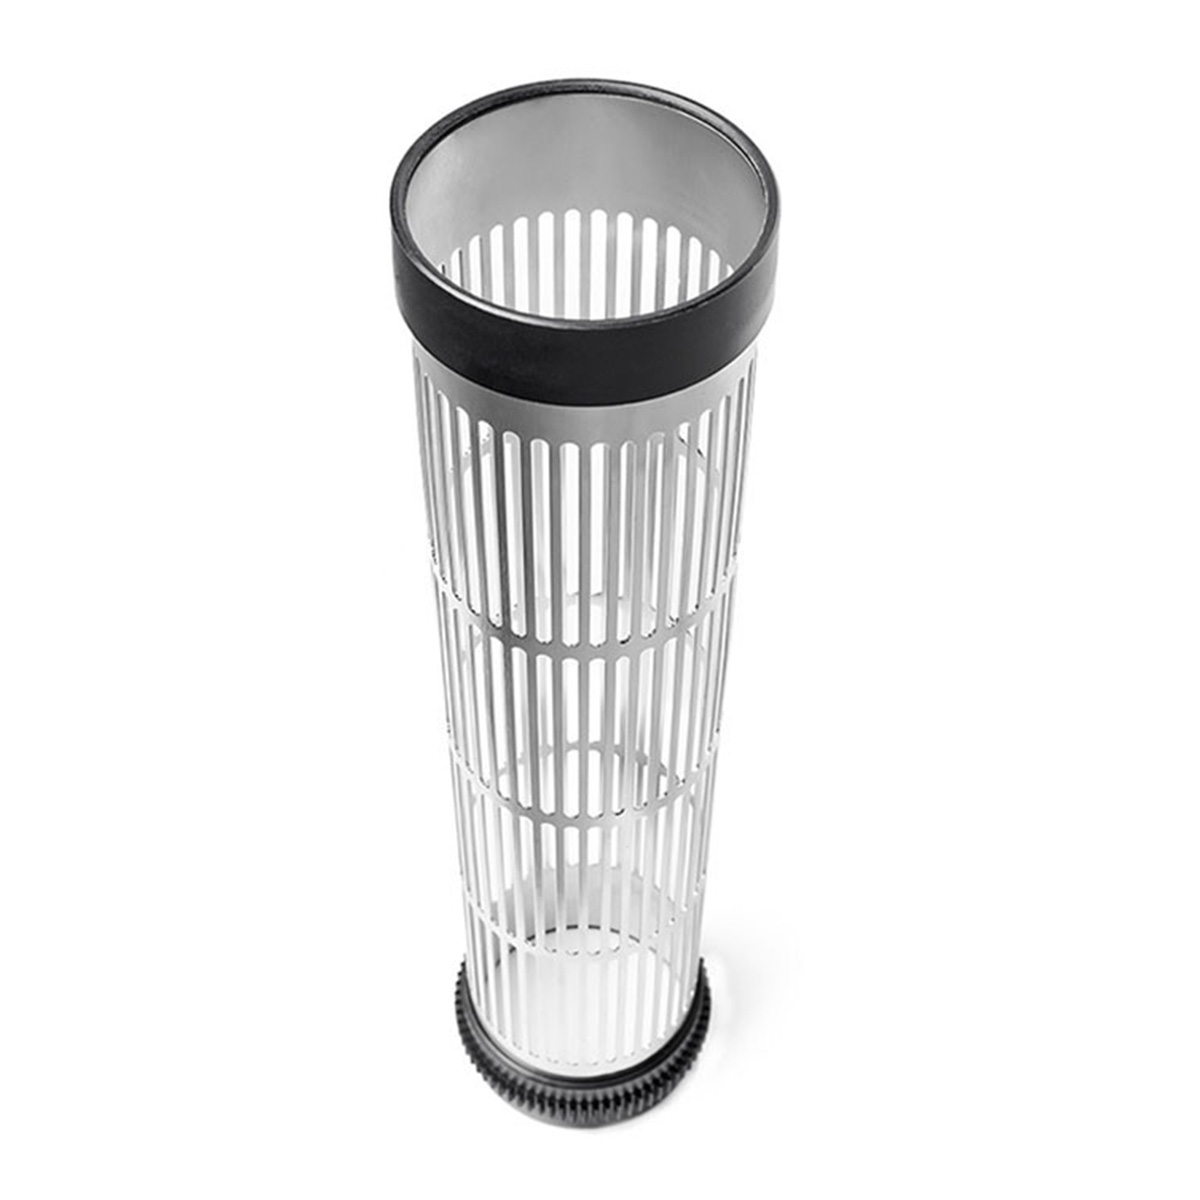 Twister Extreme Tumbler Replacement for T6 Trimmer ⋆ HTG Supply Hydroponics & Grow Lights